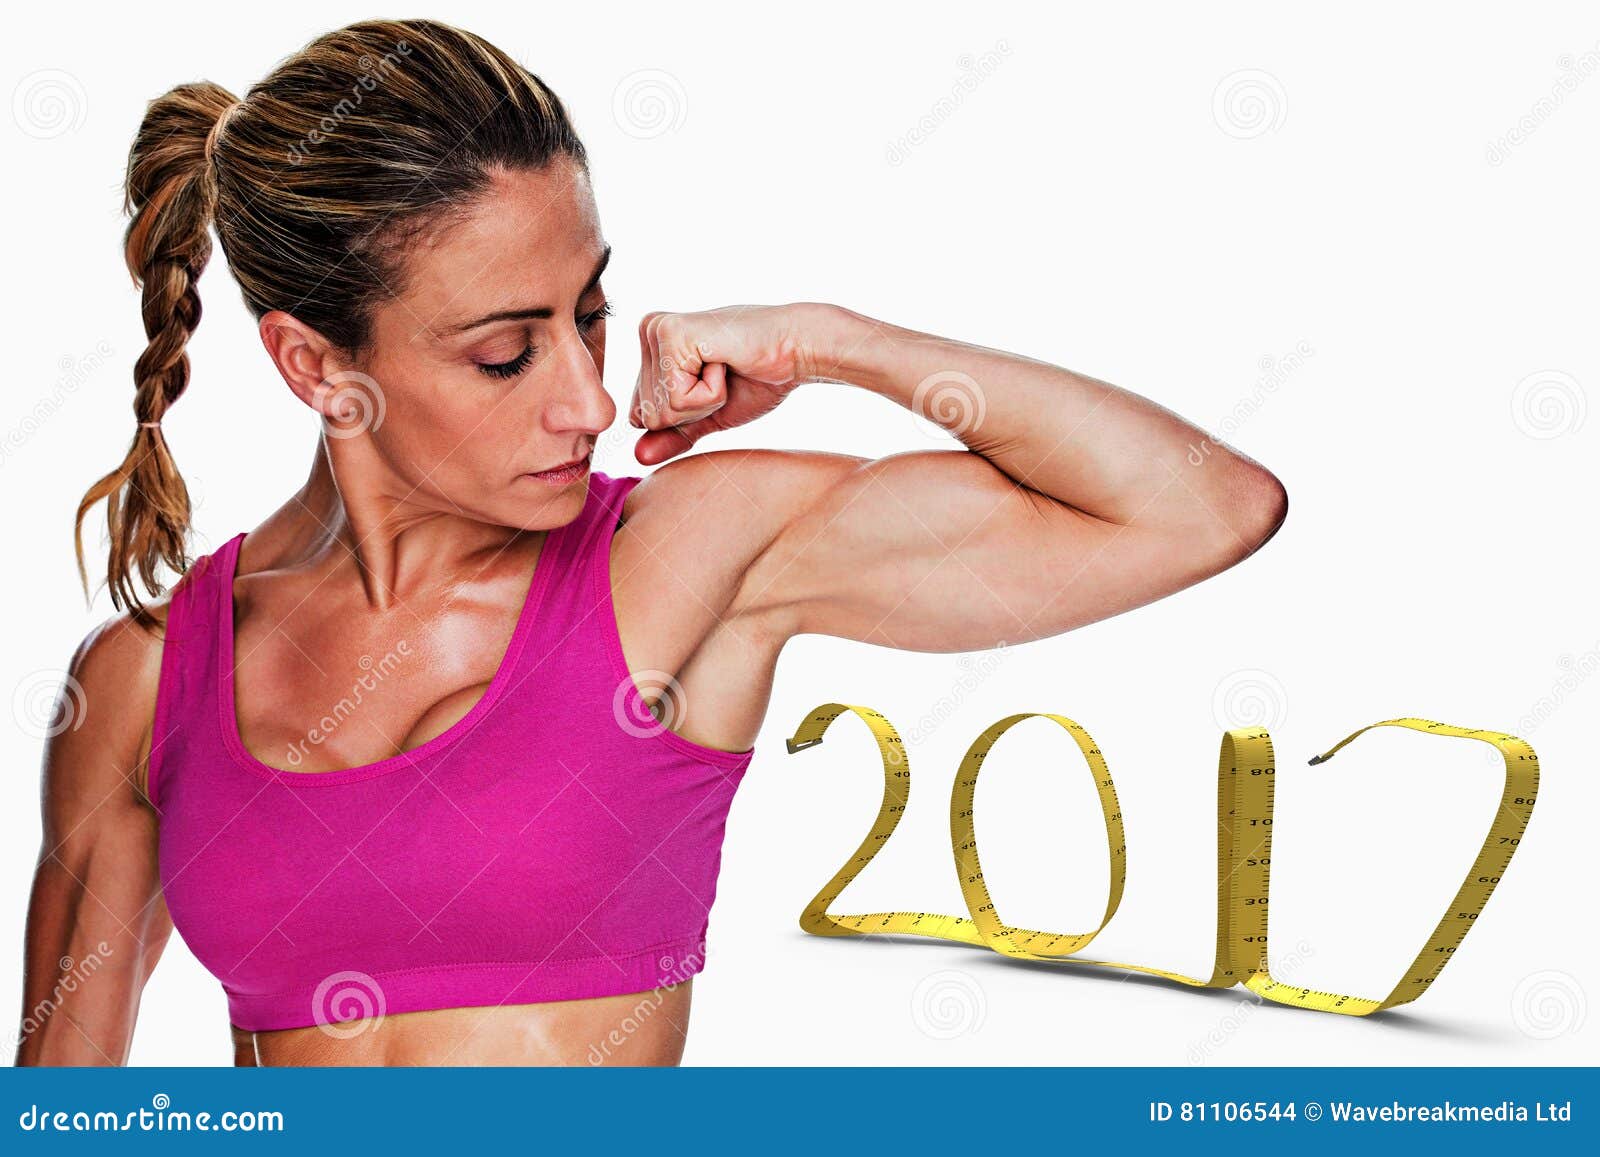 260+ Female Biceps Measurement Stock Photos, Pictures & Royalty-Free Images  - iStock